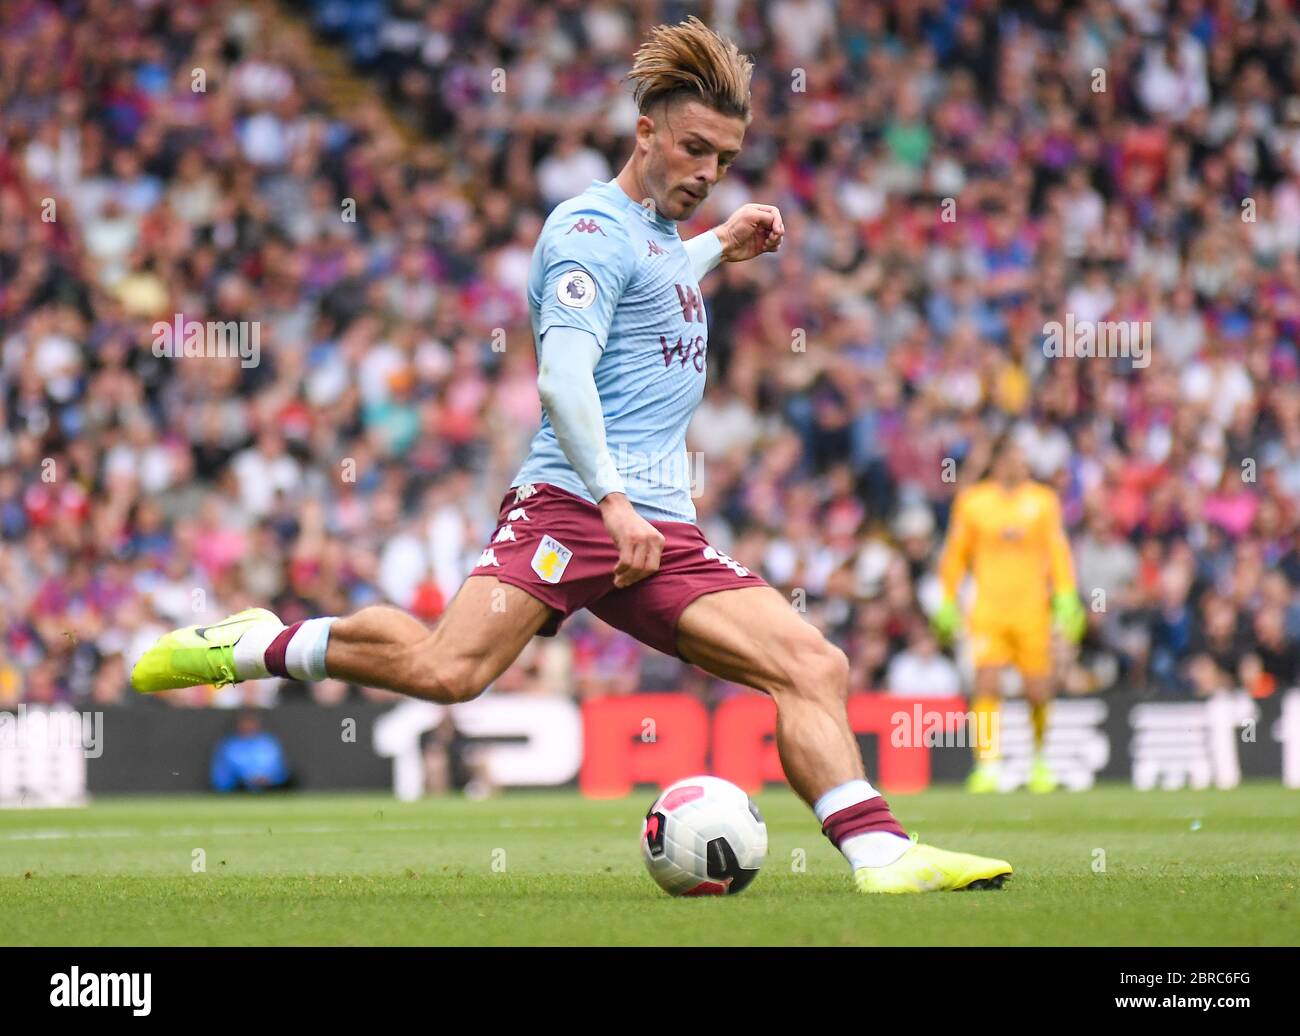 LONDON, ENGLAND - AUGUST 31, 2019: Jack Grealish of Villa pictured during the 2019/20 Premier League game between Crystal Palace FC and Aston Villa FC at Selhurst Park. Stock Photo